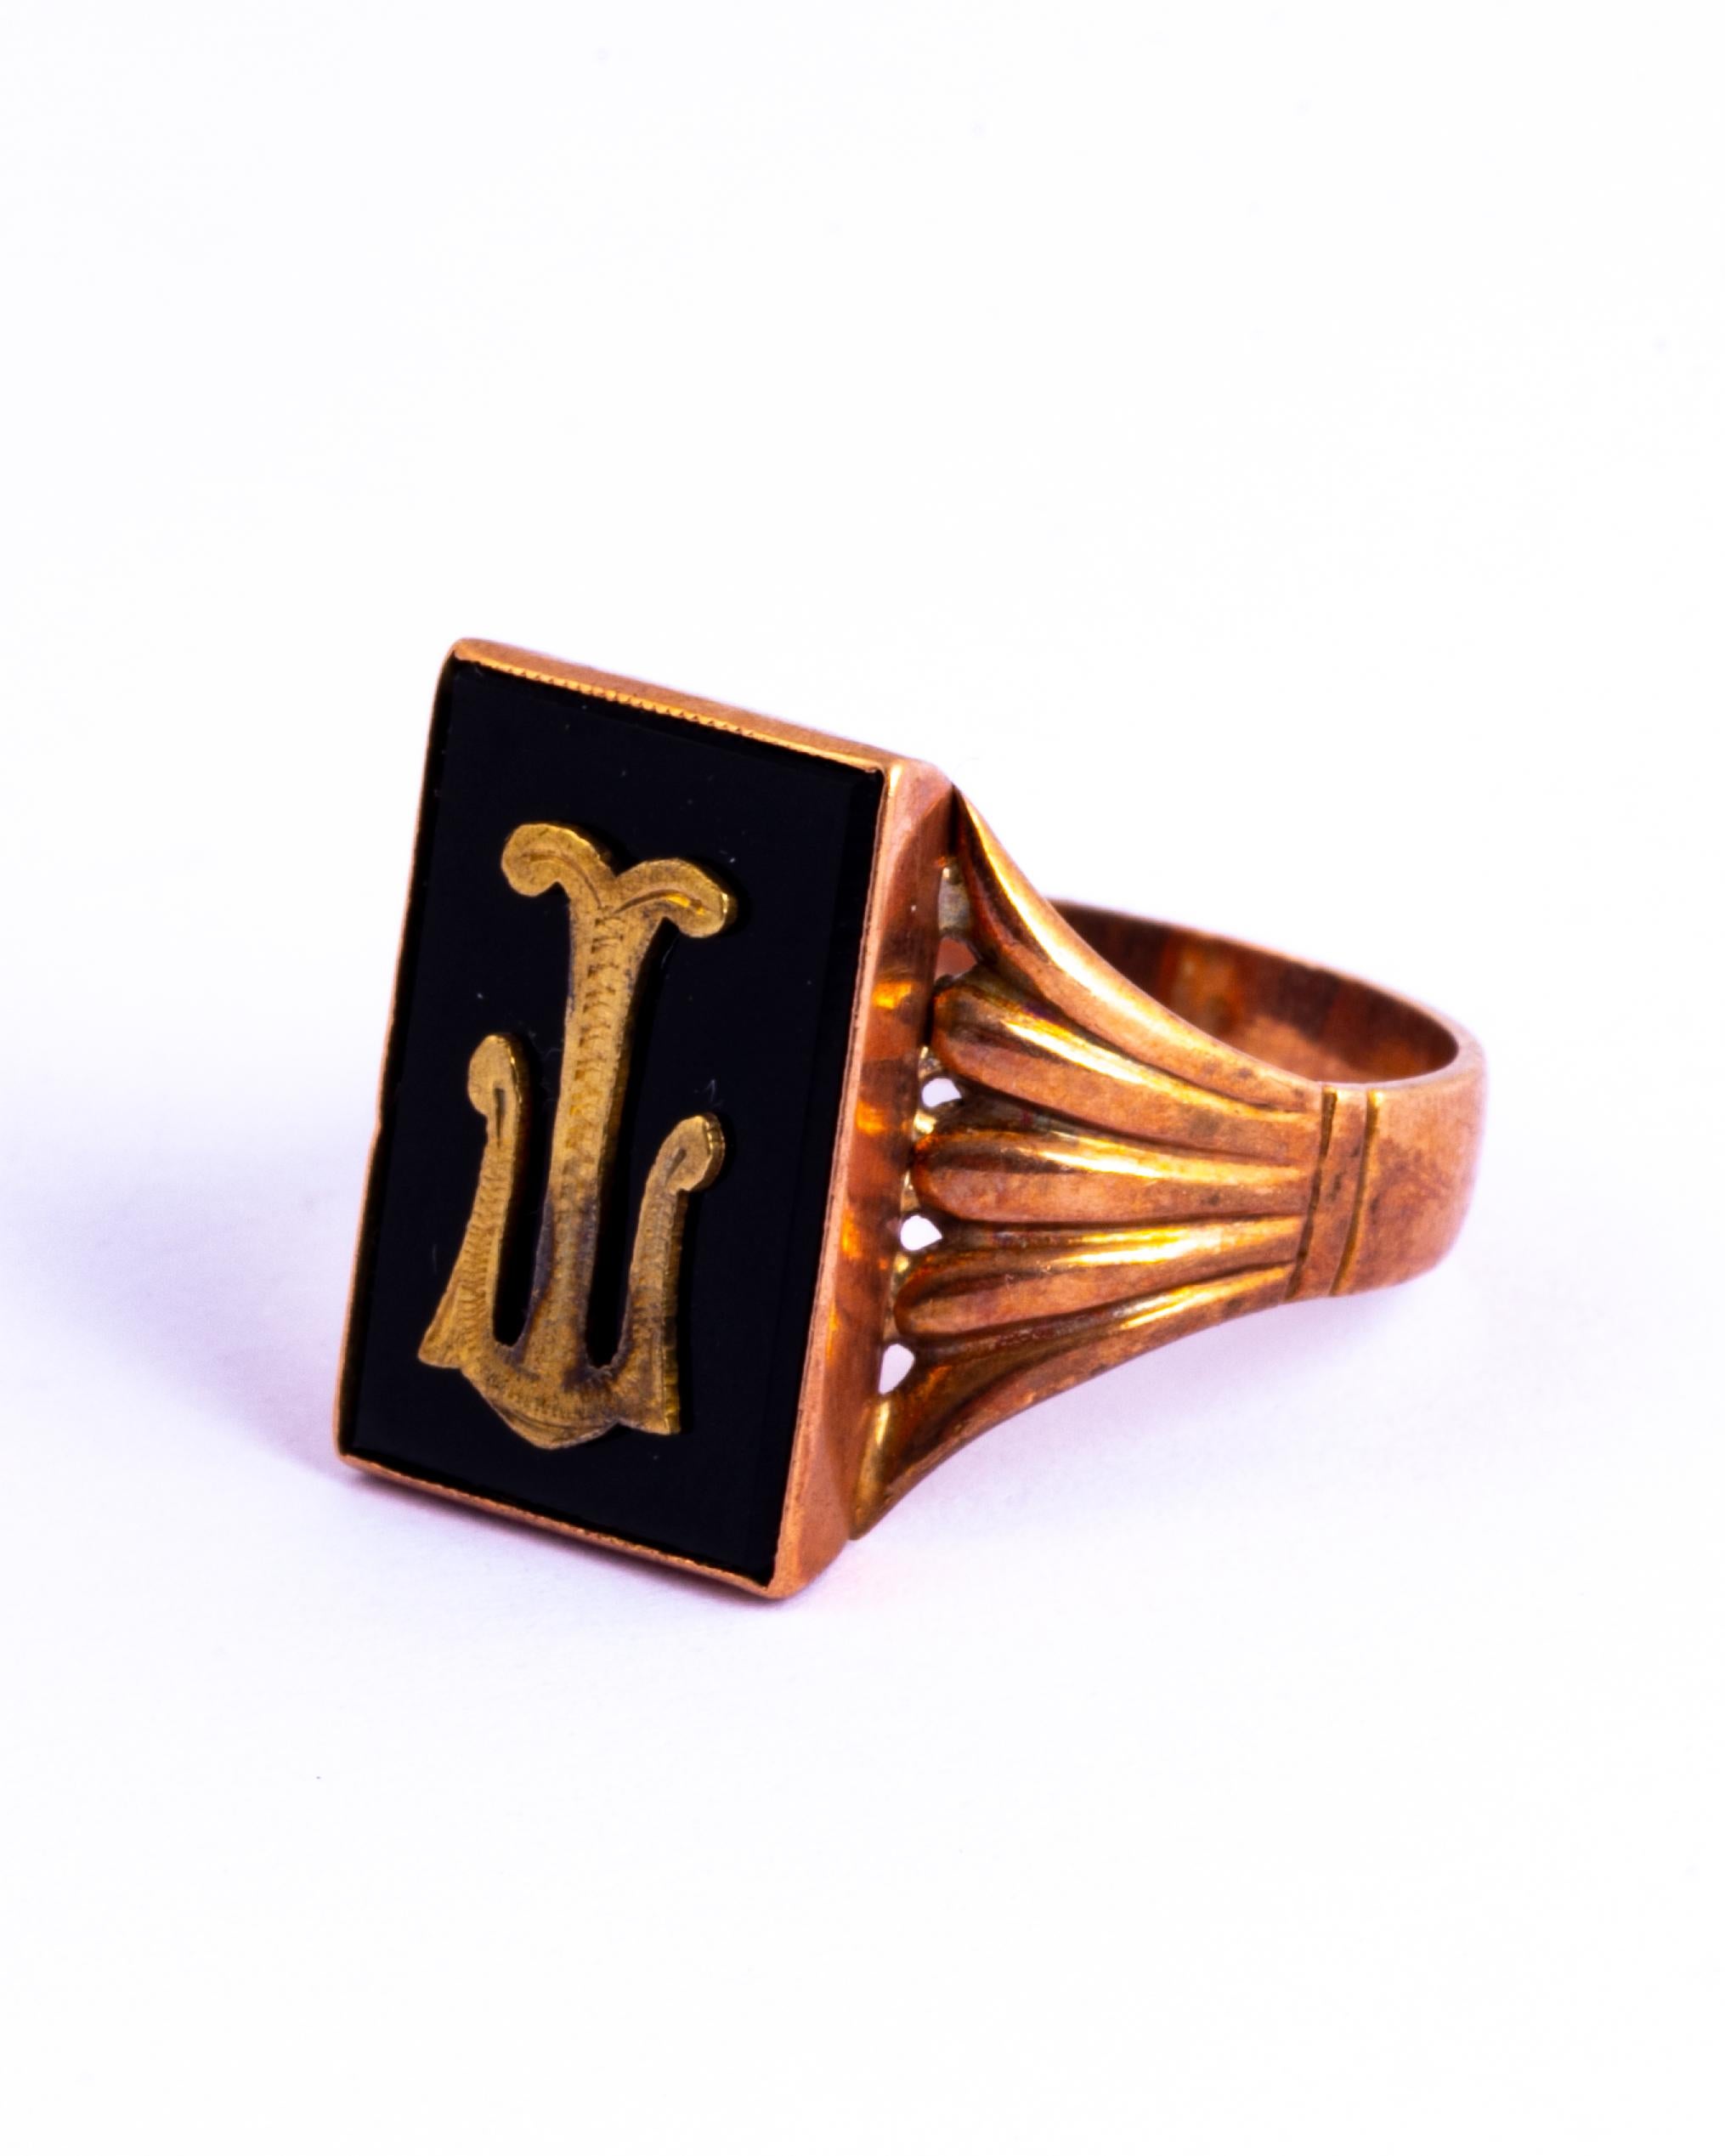 This ring holds a rectangular onyx stone which has the letter 'T' which lays over the top. The shoulders have classic art deco shell style to them. Modelled in 9carat rose gold. 

Ring Size: V or 10 1/2
Face Dimensions: 12x18mm

Weight: 5.5g